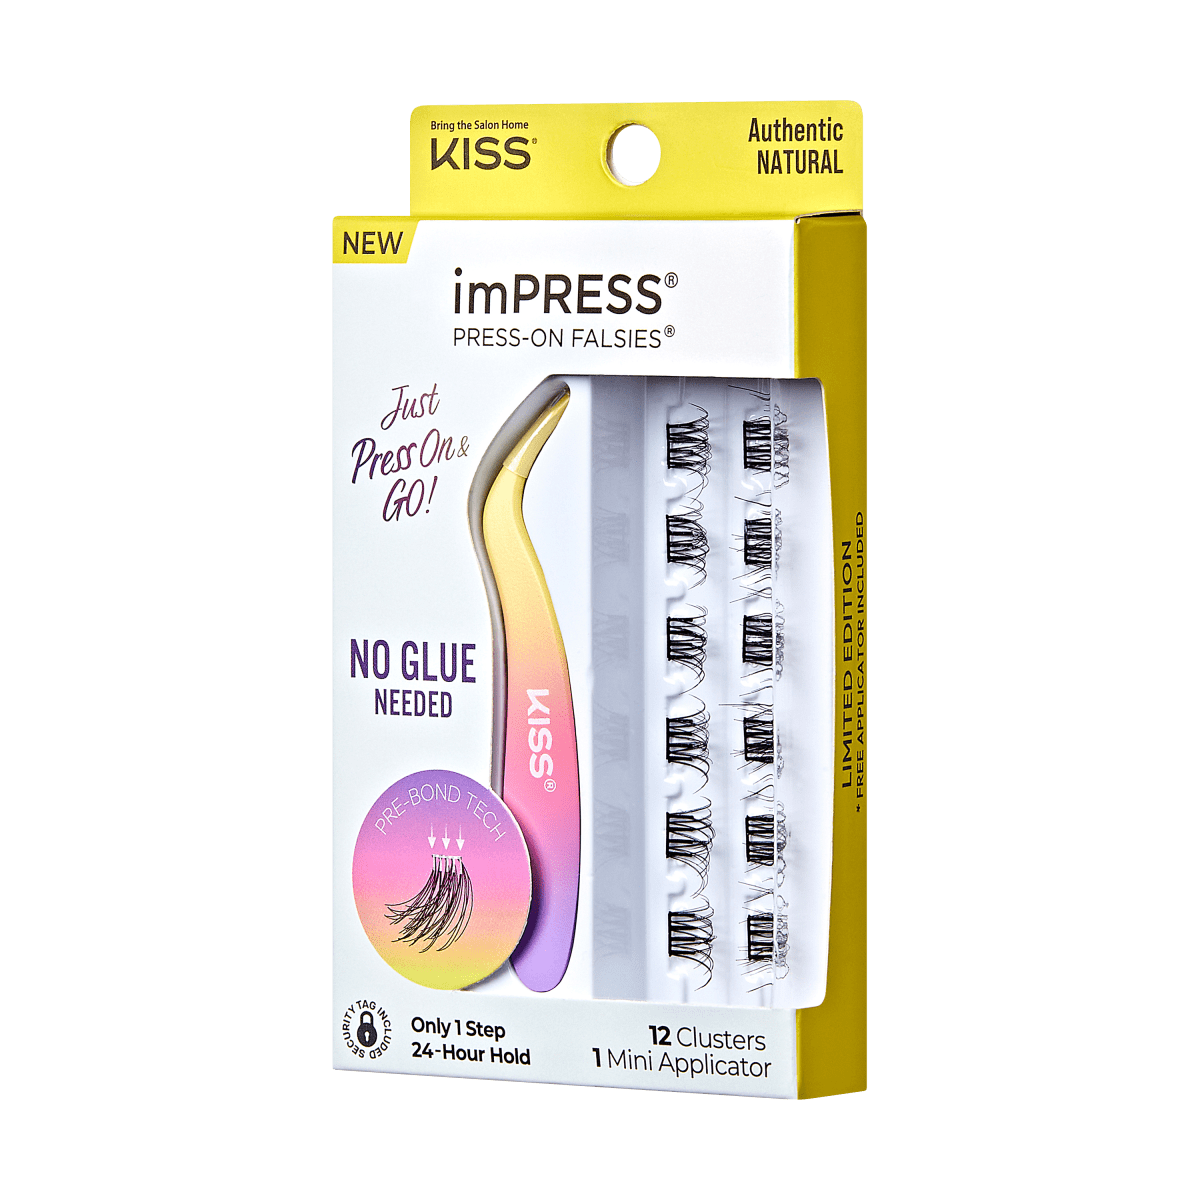 imPRESS Press-On Falsies Minipack, 12 Clusters + Applicator - Authentic